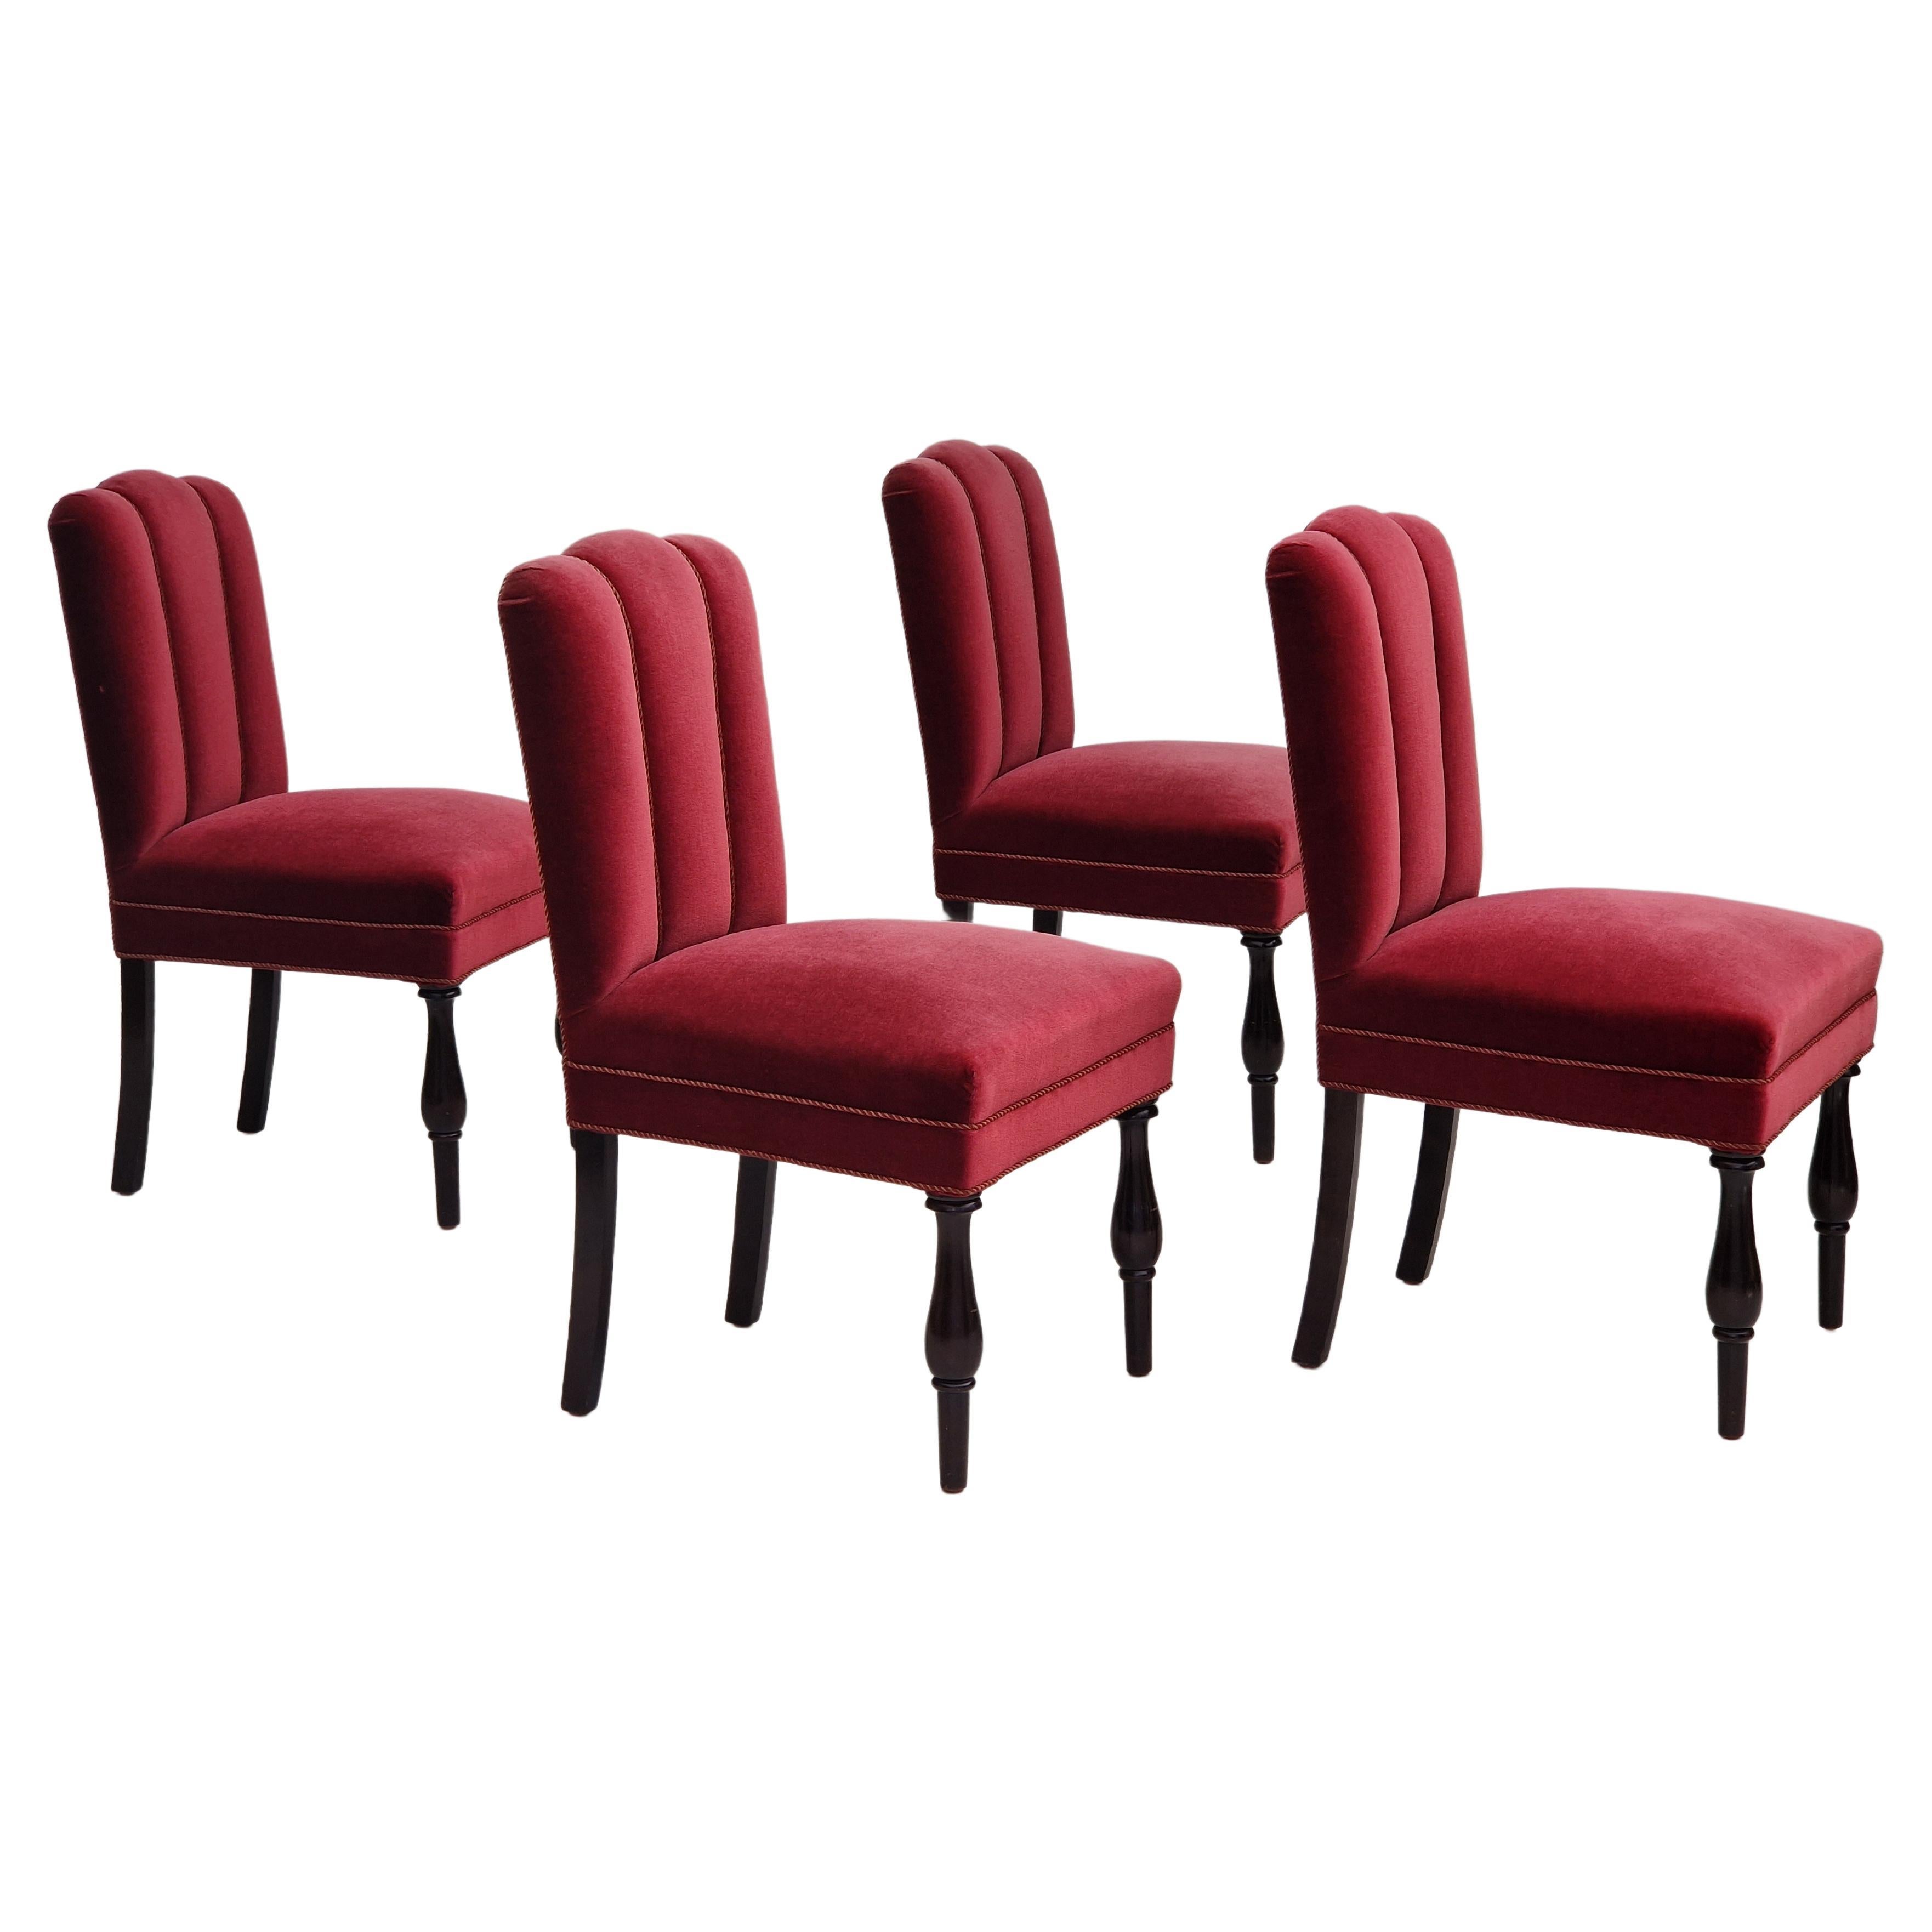 1950s, Danish Design, Set of 4 Dinning Chairs, Oak Wood, Cherry-Red Velour For Sale